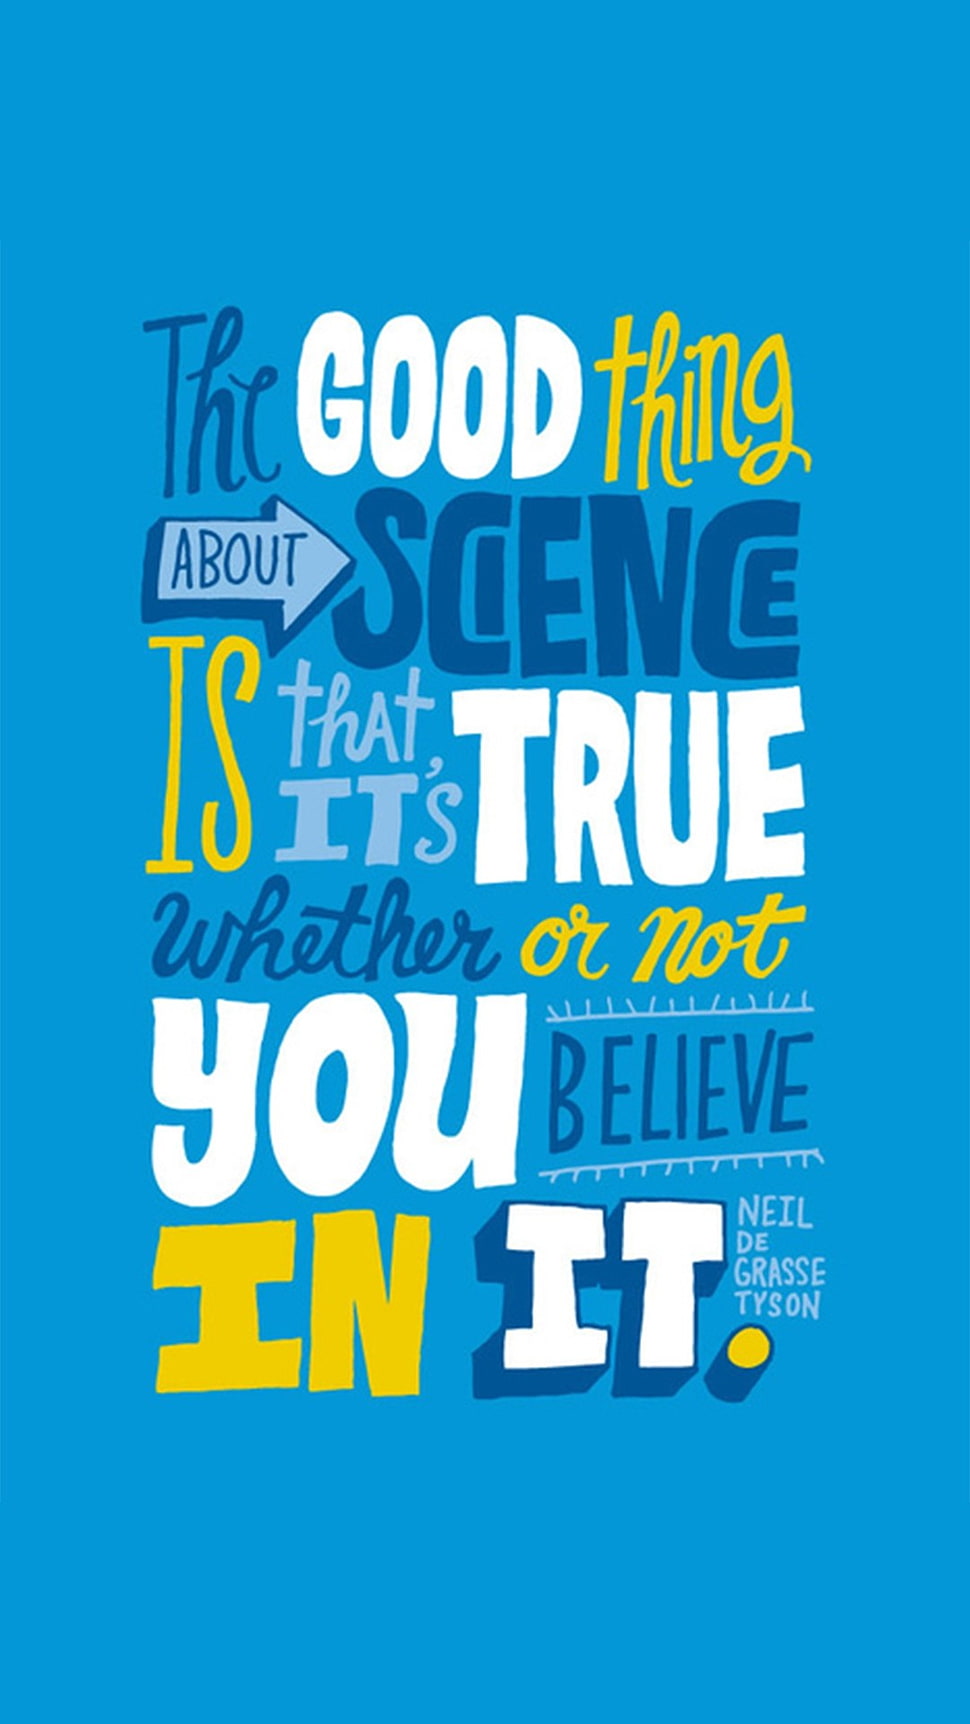 The good thing about science text, science, typography, quote, blue background HD wallpaper